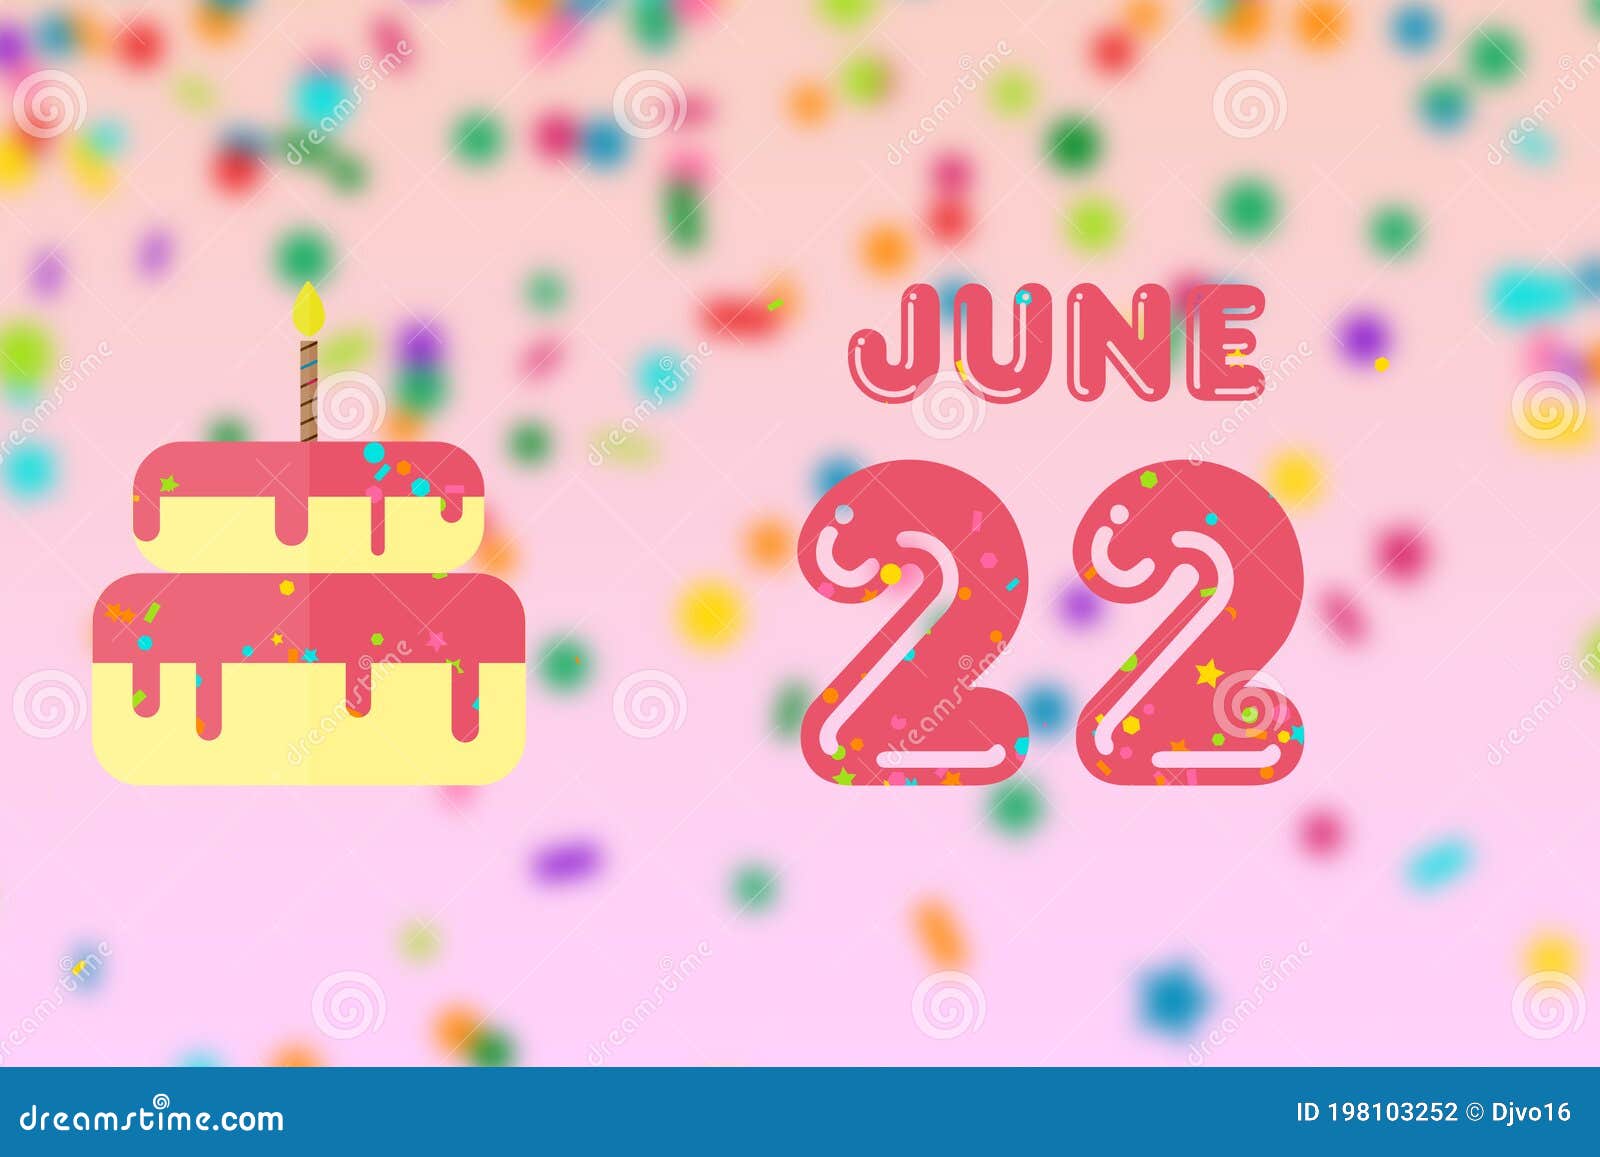 June 22nd. Day 22 of Month,Birthday Greeting Card with Date of Birth and Birthday Cake. Summer Month, Day of the Year Concept Stock Illustration - Illustration of schedule, greeting: 198103252